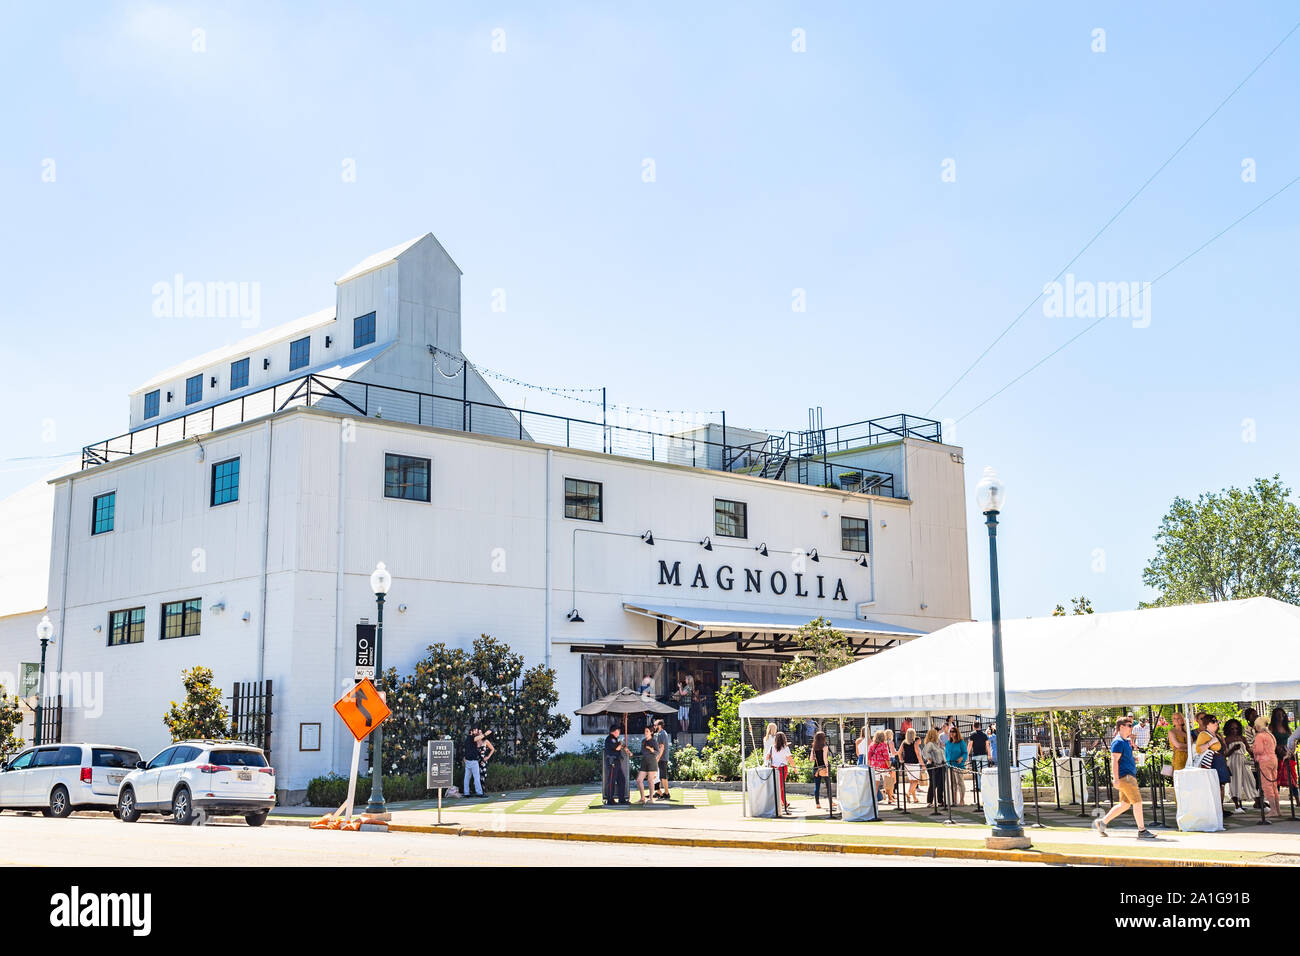 Magnolia Farms Is A Home Goods Store And Bakery In Waco Texas Created By Chip And Joanna Gaines Popular Diy Television Hosts Stock Photo Alamy,How To Declutter Kitchen Utensils